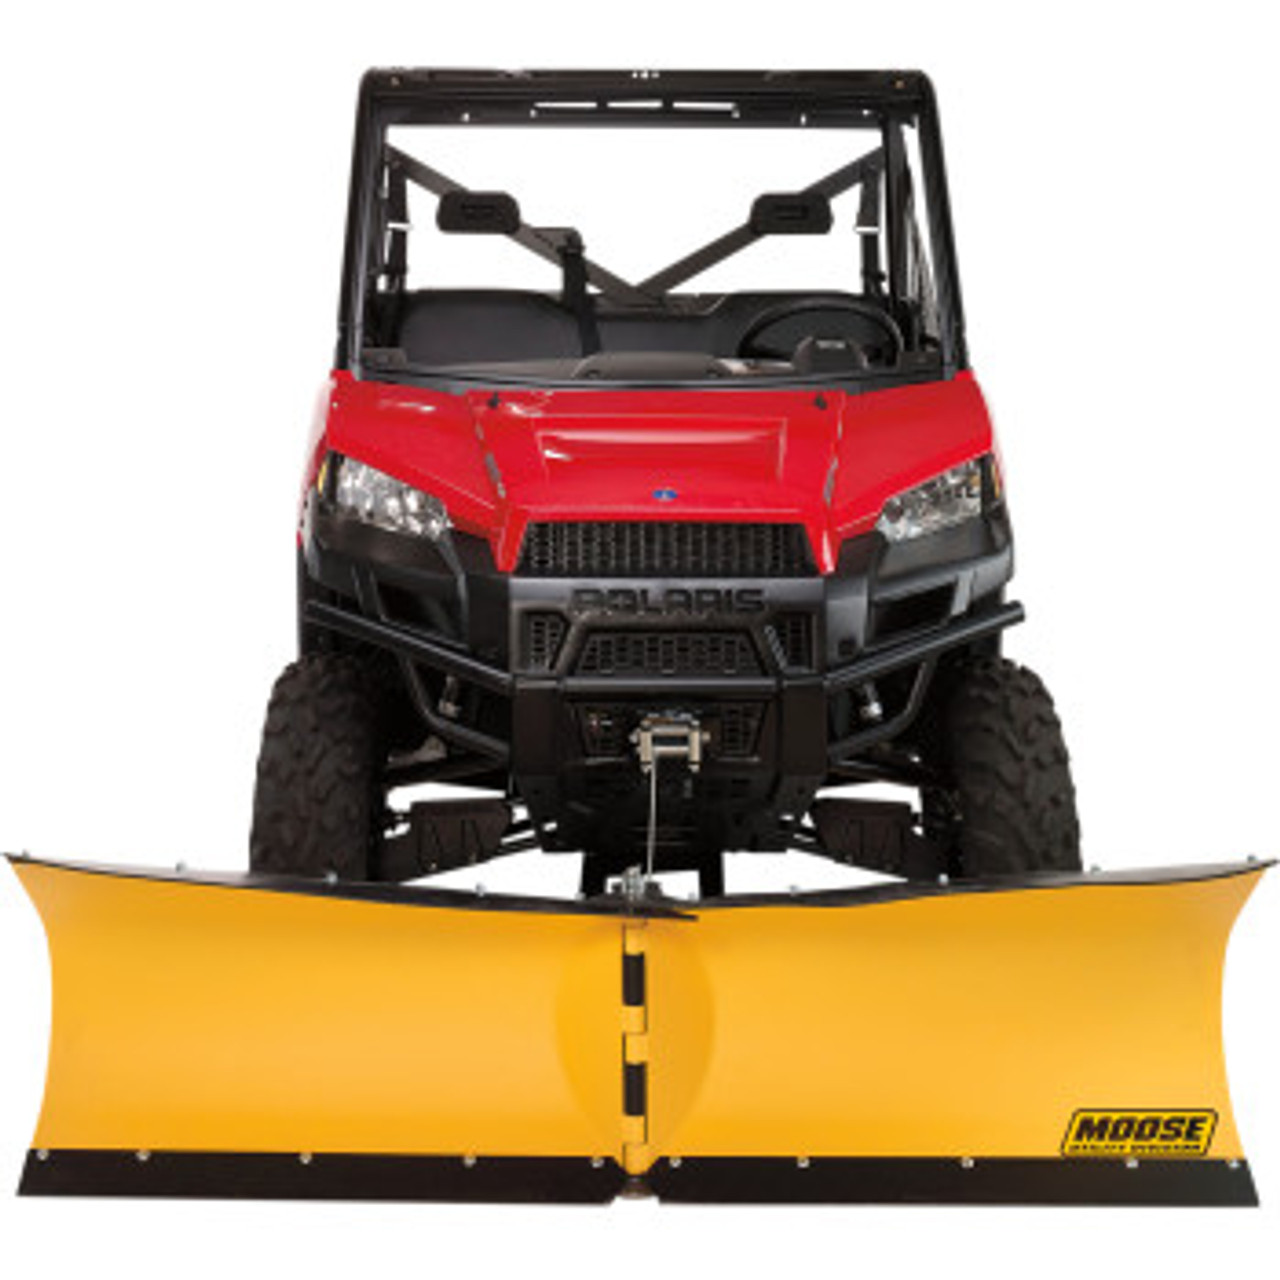 V-Plow Blade - Right Side - 72"